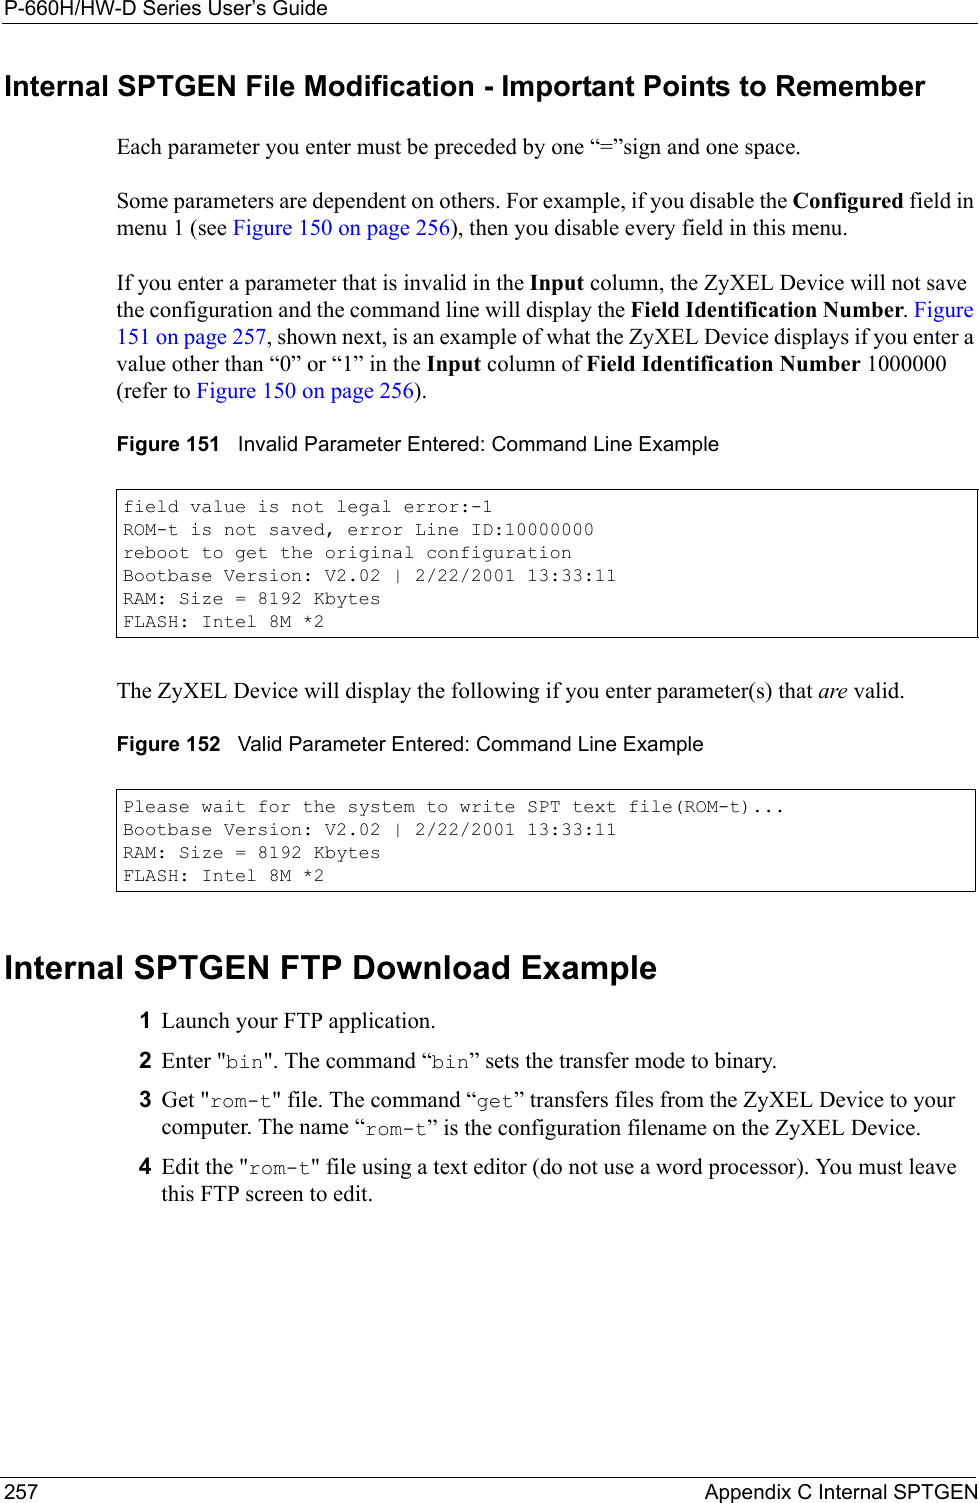 P-660H/HW-D Series User’s Guide257 Appendix C Internal SPTGENInternal SPTGEN File Modification - Important Points to RememberEach parameter you enter must be preceded by one “=”sign and one space.Some parameters are dependent on others. For example, if you disable the Configured field in menu 1 (see Figure 150 on page 256), then you disable every field in this menu.If you enter a parameter that is invalid in the Input column, the ZyXEL Device will not save the configuration and the command line will display the Field Identification Number. Figure 151 on page 257, shown next, is an example of what the ZyXEL Device displays if you enter a value other than “0” or “1” in the Input column of Field Identification Number 1000000 (refer to Figure 150 on page 256). Figure 151   Invalid Parameter Entered: Command Line ExampleThe ZyXEL Device will display the following if you enter parameter(s) that are valid.Figure 152   Valid Parameter Entered: Command Line ExampleInternal SPTGEN FTP Download Example1Launch your FTP application.2Enter &quot;bin&quot;. The command “bin” sets the transfer mode to binary.3Get &quot;rom-t&quot; file. The command “get” transfers files from the ZyXEL Device to your computer. The name “rom-t” is the configuration filename on the ZyXEL Device.4Edit the &quot;rom-t&quot; file using a text editor (do not use a word processor). You must leave this FTP screen to edit.field value is not legal error:-1ROM-t is not saved, error Line ID:10000000reboot to get the original configurationBootbase Version: V2.02 | 2/22/2001 13:33:11RAM: Size = 8192 KbytesFLASH: Intel 8M *2Please wait for the system to write SPT text file(ROM-t)...Bootbase Version: V2.02 | 2/22/2001 13:33:11RAM: Size = 8192 KbytesFLASH: Intel 8M *2